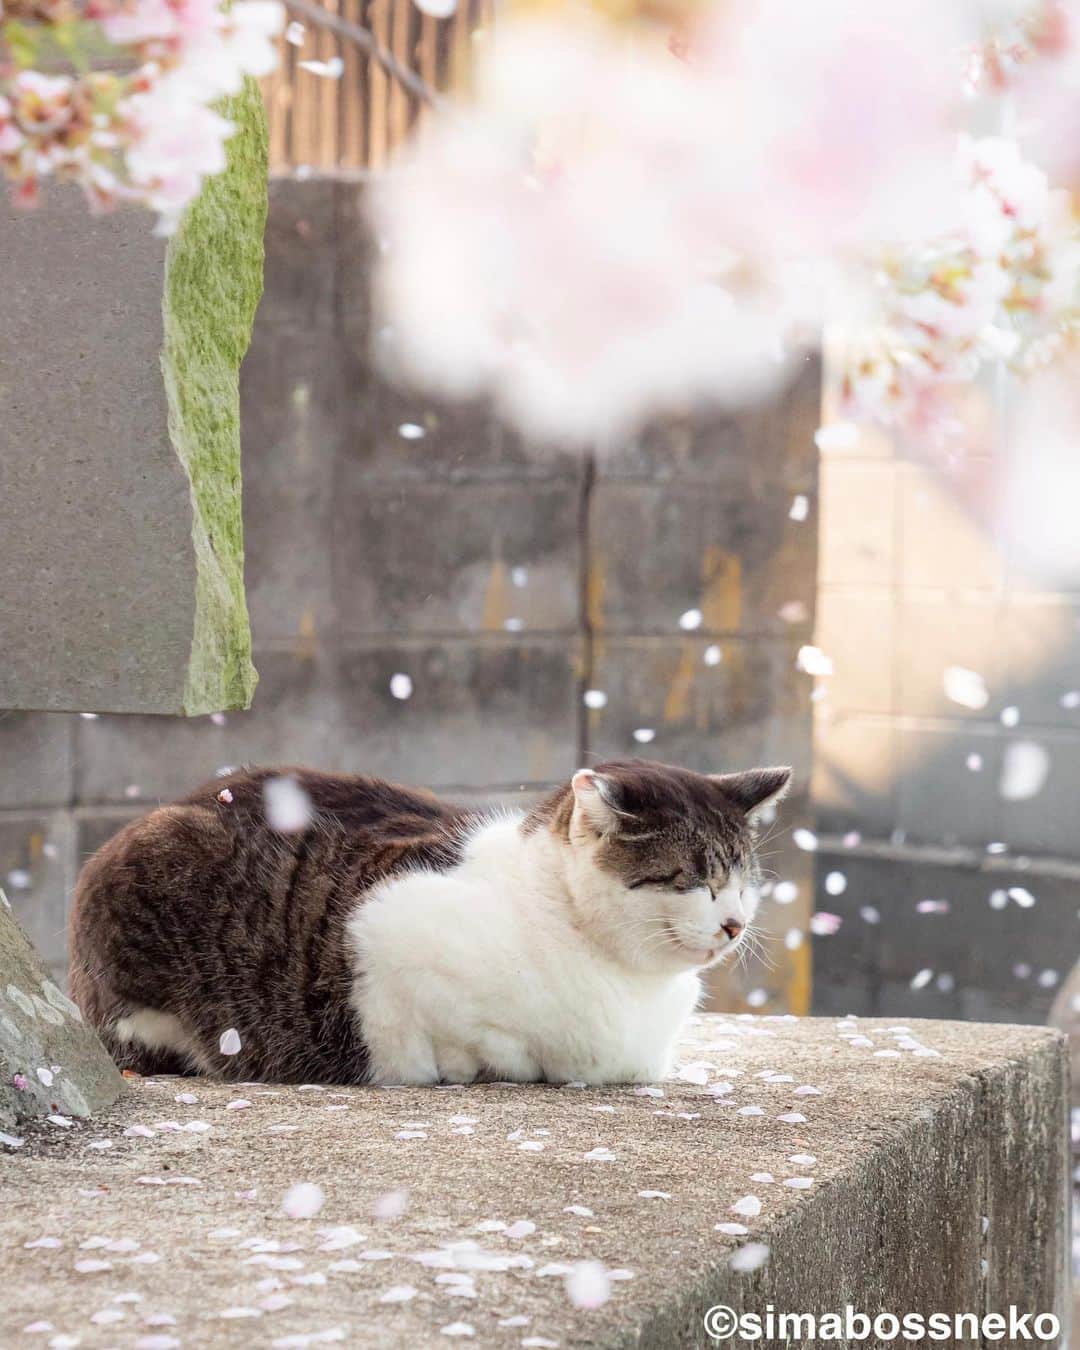 simabossnekoさんのインスタグラム写真 - (simabossnekoInstagram)「・ 素敵な桜でしたにゃ🌸 It was lovely cherry blossoms and cats❣️ Swipeしてね←←🐾  〜お知らせ〜 新作写真集「島にゃんこ」好評発売中❣️ @simabossneko と、ぺにゃんこ( @p_nyanco22 )との初共著🐾  日本の島々で7年間撮り続けてきた、島の猫さん達のとびっきりの表情やしぐさがいっぱい✨ 厳選したベストショットから初公開の作品まで、愛おしくて幸せな瞬間を集めました。  ★Amazonほかオンライン書店、本屋さんにて！ ★メルカリShopsとminne simabossneko's shopでは、サイン本を販売中🐾  お気に入りの一冊になれば嬉しく思います☺️  📘A5変形サイズ／88ページ 1,210円(税込) ワニブックス刊  販売各ショップへは @simabossneko もしくは @p_nyanco22 のプロフィールURLよりご覧いただけます。  もしくはminne、メルカリShops内にて "simabossneko's shop"と検索ください🔎 ・ ・ 【Notice】 NEW 3rd Photobook "Shima Nyanko (Island Cats)"  The book is co-authored by @simabossneko and @p_nyanco22  There are lots of wonderful photos of island cats✨  ◆The autographed books are available now at “minne simabossneko's shop“.   〜Description of the work〜 The cute cats that we have been shooting for 7 years in the islands of Japan.  From the carefully selected best shots to the first public photo, we have collected lovely and happy gestures. Kissing, cuddling, rubbing, synchronizing, playing, licking... The cats will heal you!  Please make a purchasing for this opportunity 😸🐾 The product page can be seen from the URL in the profile of @simabossneko or @p_nyanco22   ★Amazon Japan https://www.amazon.co.jp/dp/4847072863  ★simabossneko's shop URL https://minne.com/＠simabossneko  It is possible to purchase and ship from Taiwan, Hong Kong, the USA, Korea, etc. ※ Shipping fee will be charged separately.  📘A5 variant size / 88 pages 1,210 JPY Published by Wanibooks ・ ・ #しまねこ #島猫 #ねこ #にゃんすたぐらむ #猫写真 #cats_of_world #catloversclub #pleasantcats #catstagram #meowed #ig_japan #lumixg9」4月21日 7時50分 - simabossneko